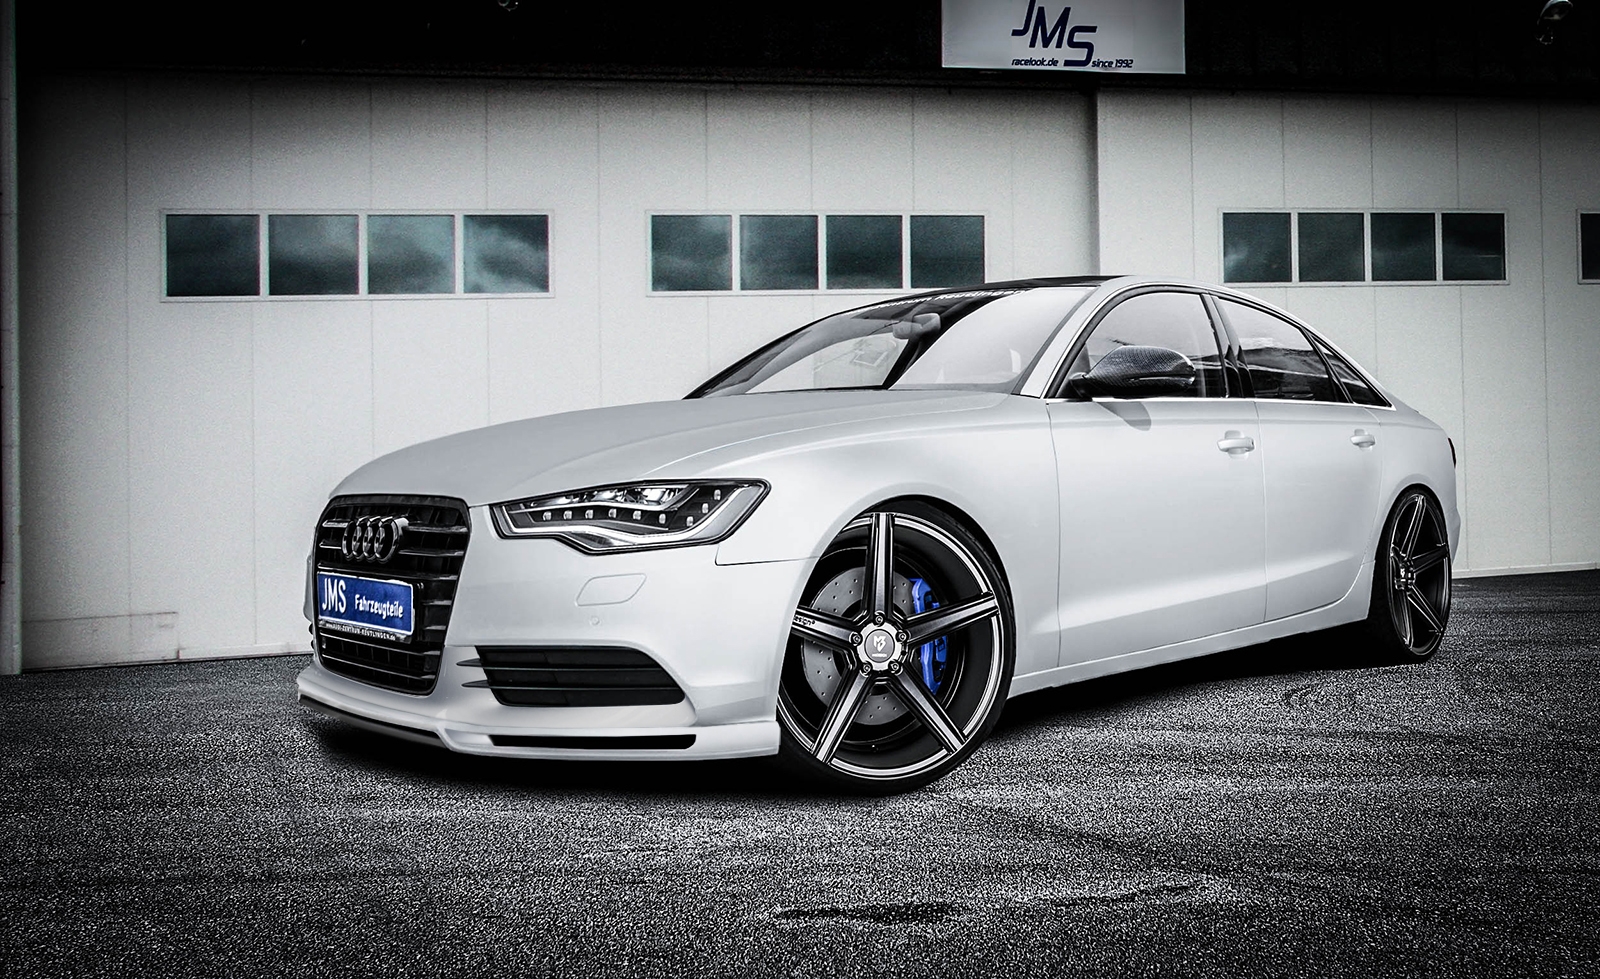 Audi A6 4G Tuning & Styling from JMS, JMS - Fahrzeugteile GmbH